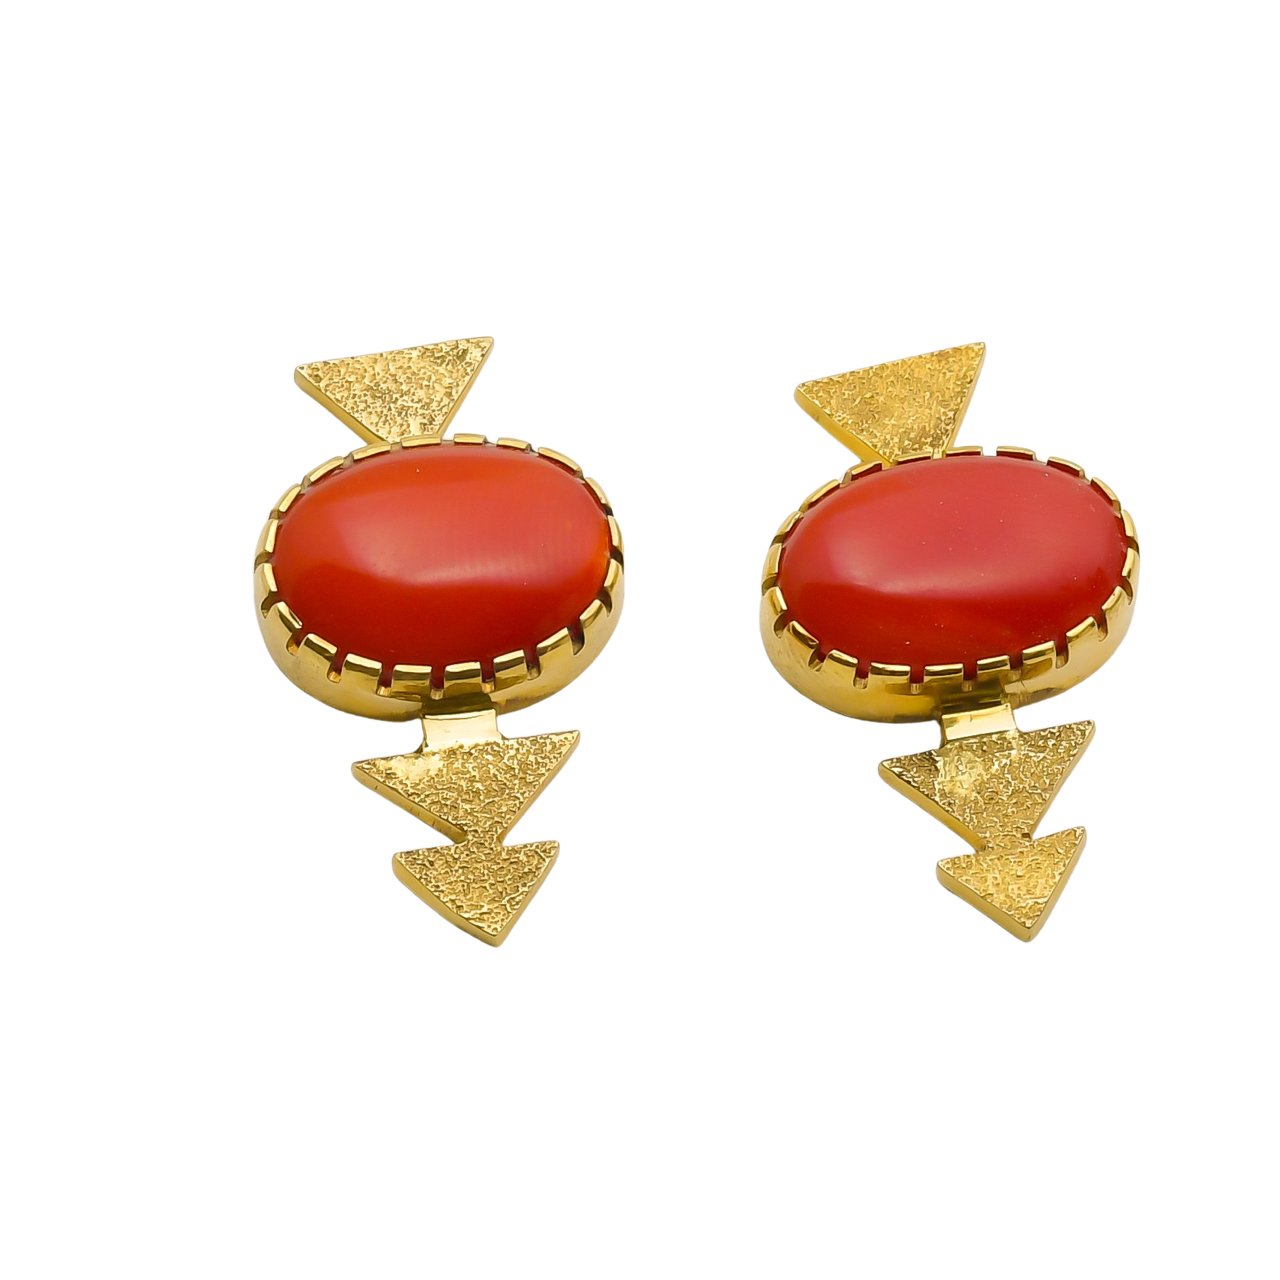 Gail Bird and Yazzie Johnson Earrings of Coral and 18k Gold - Turquoise & Tufa